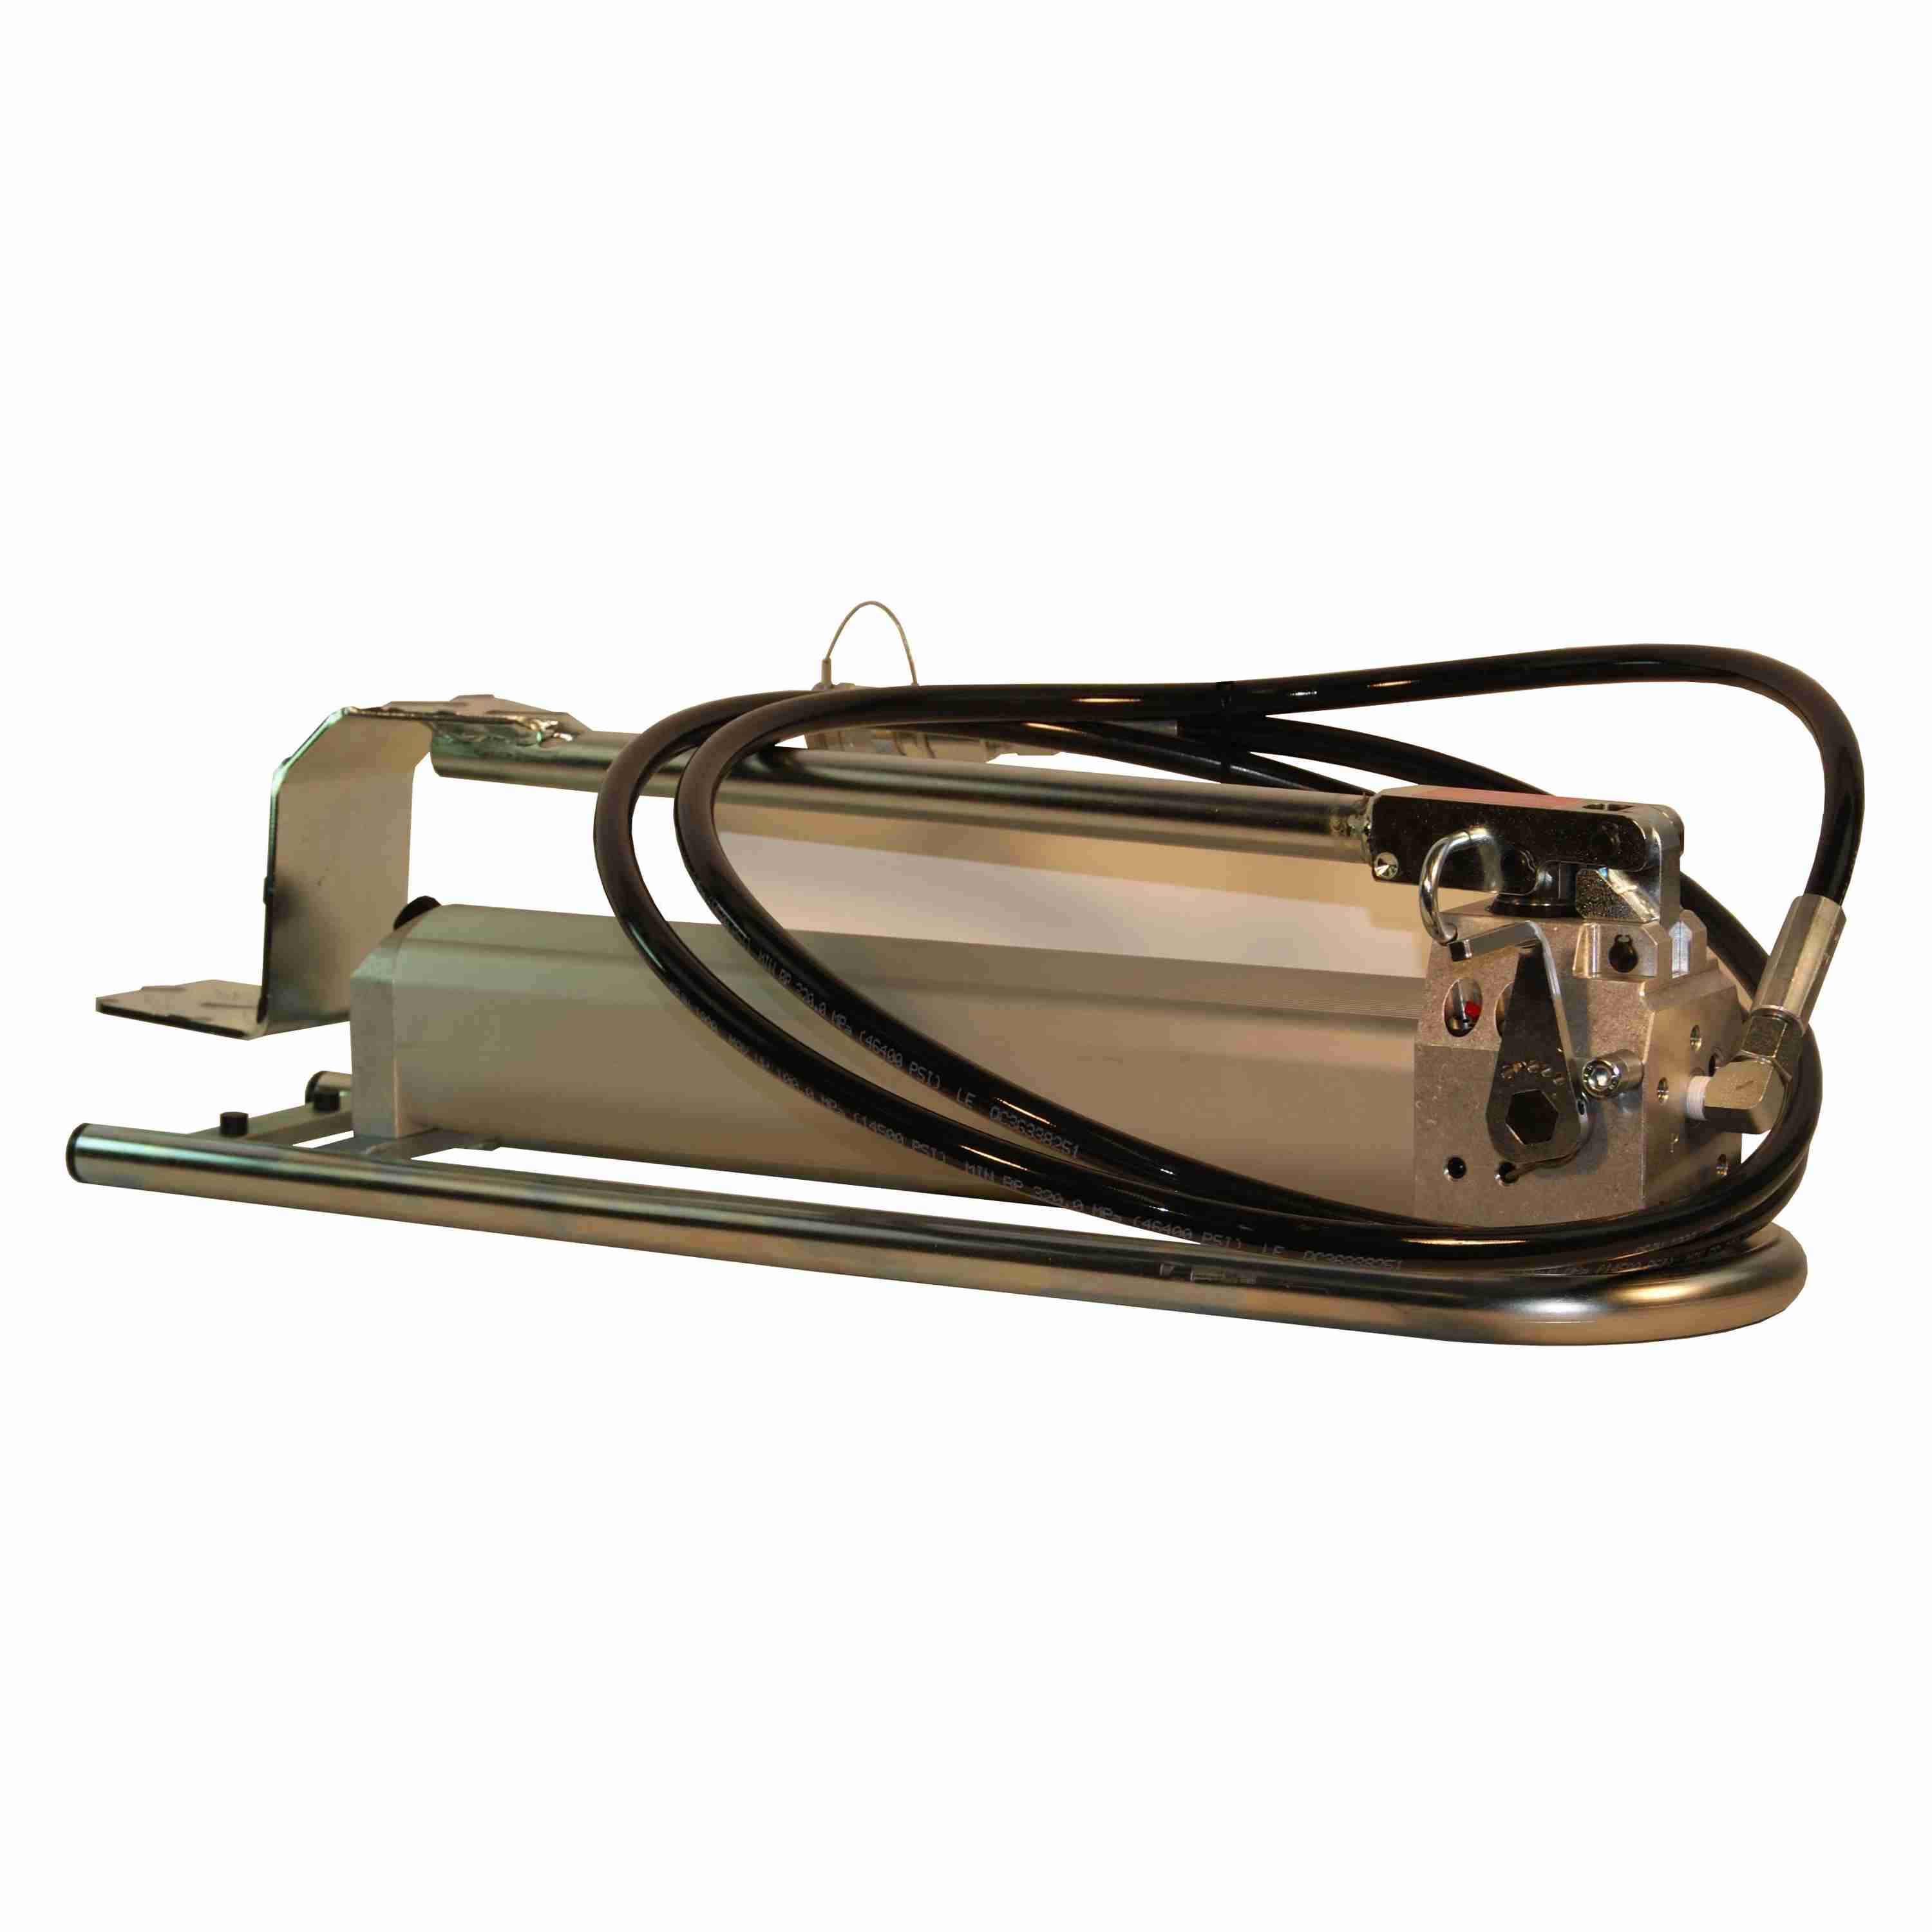 FHP2-700BAR - Hydraulic foot pump for single-acting tools